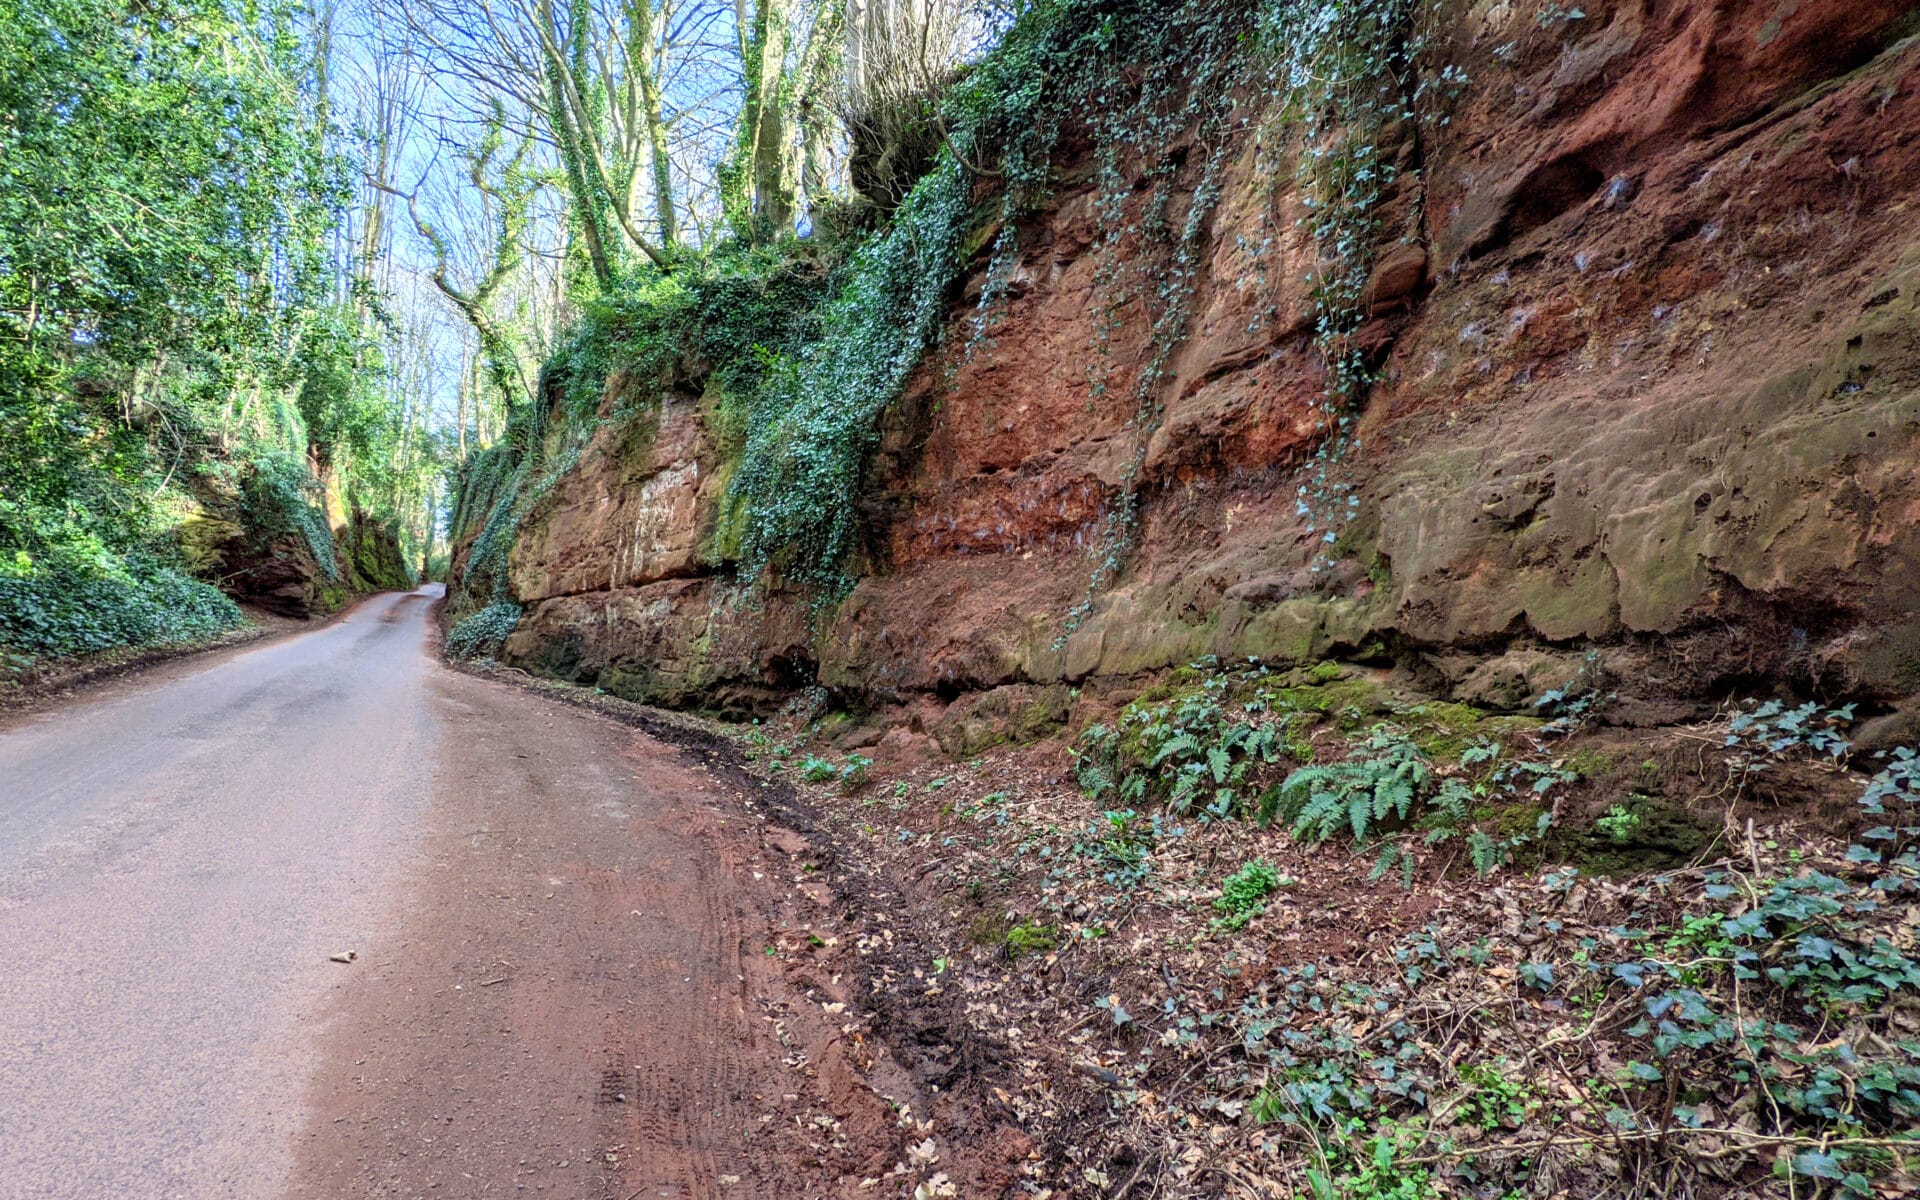 A road runs through the high, red, rocky walls of Nynehead Hollow.